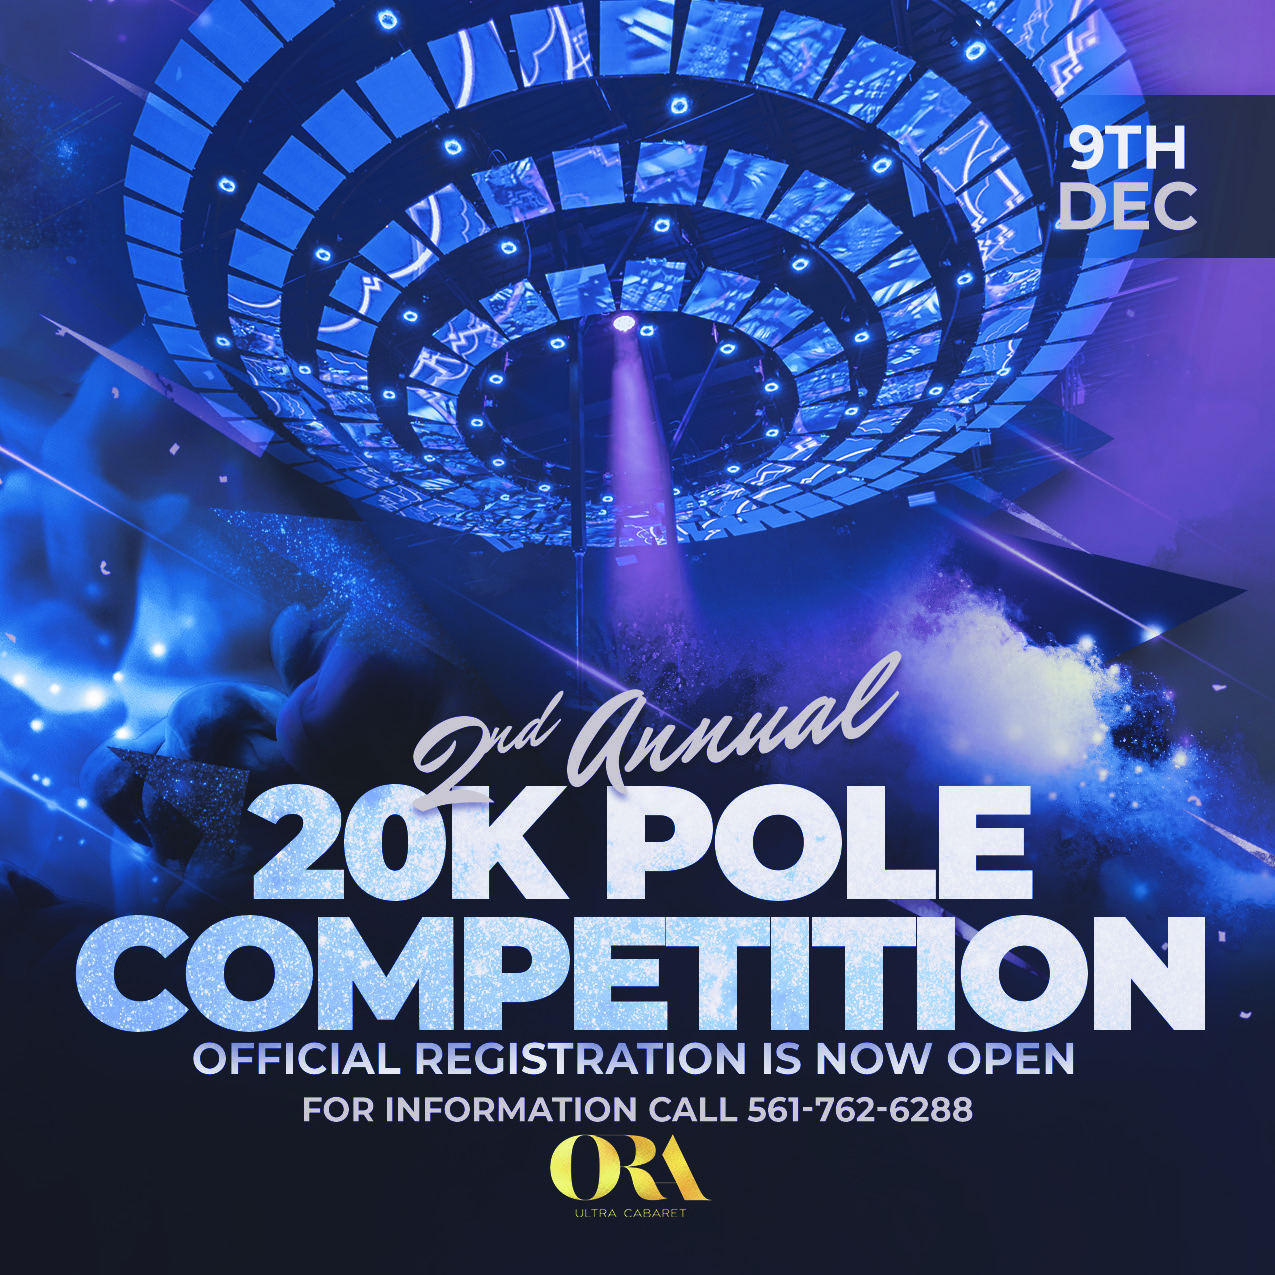 2nd Annual 20K Pole Competition